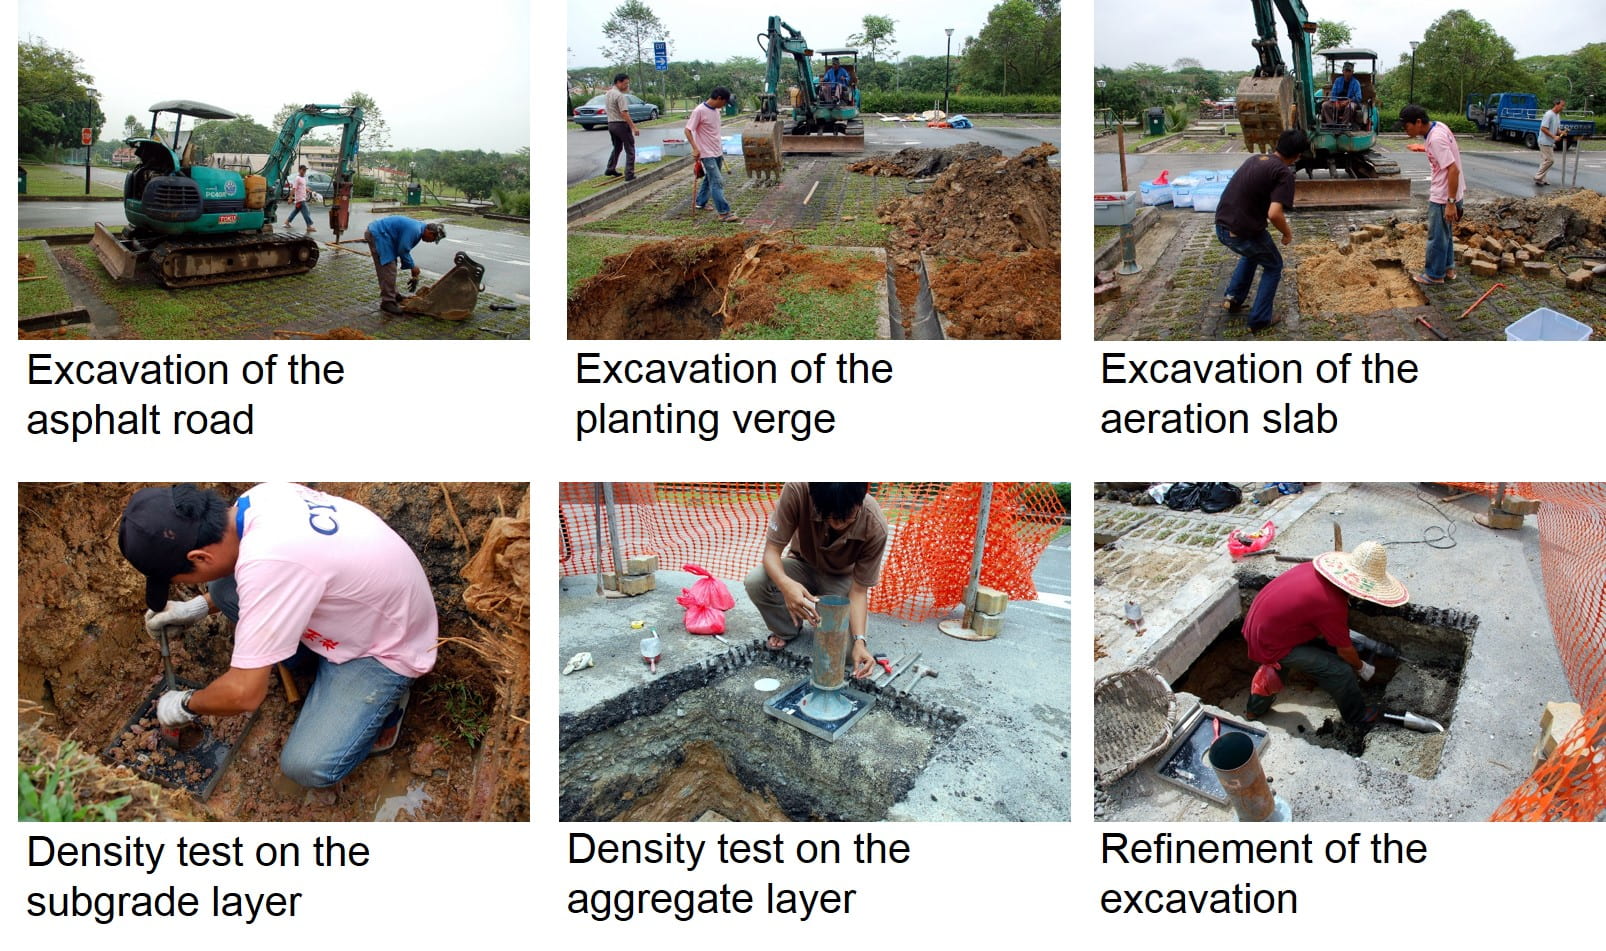 Excavation and density tests in the aeration slab studies